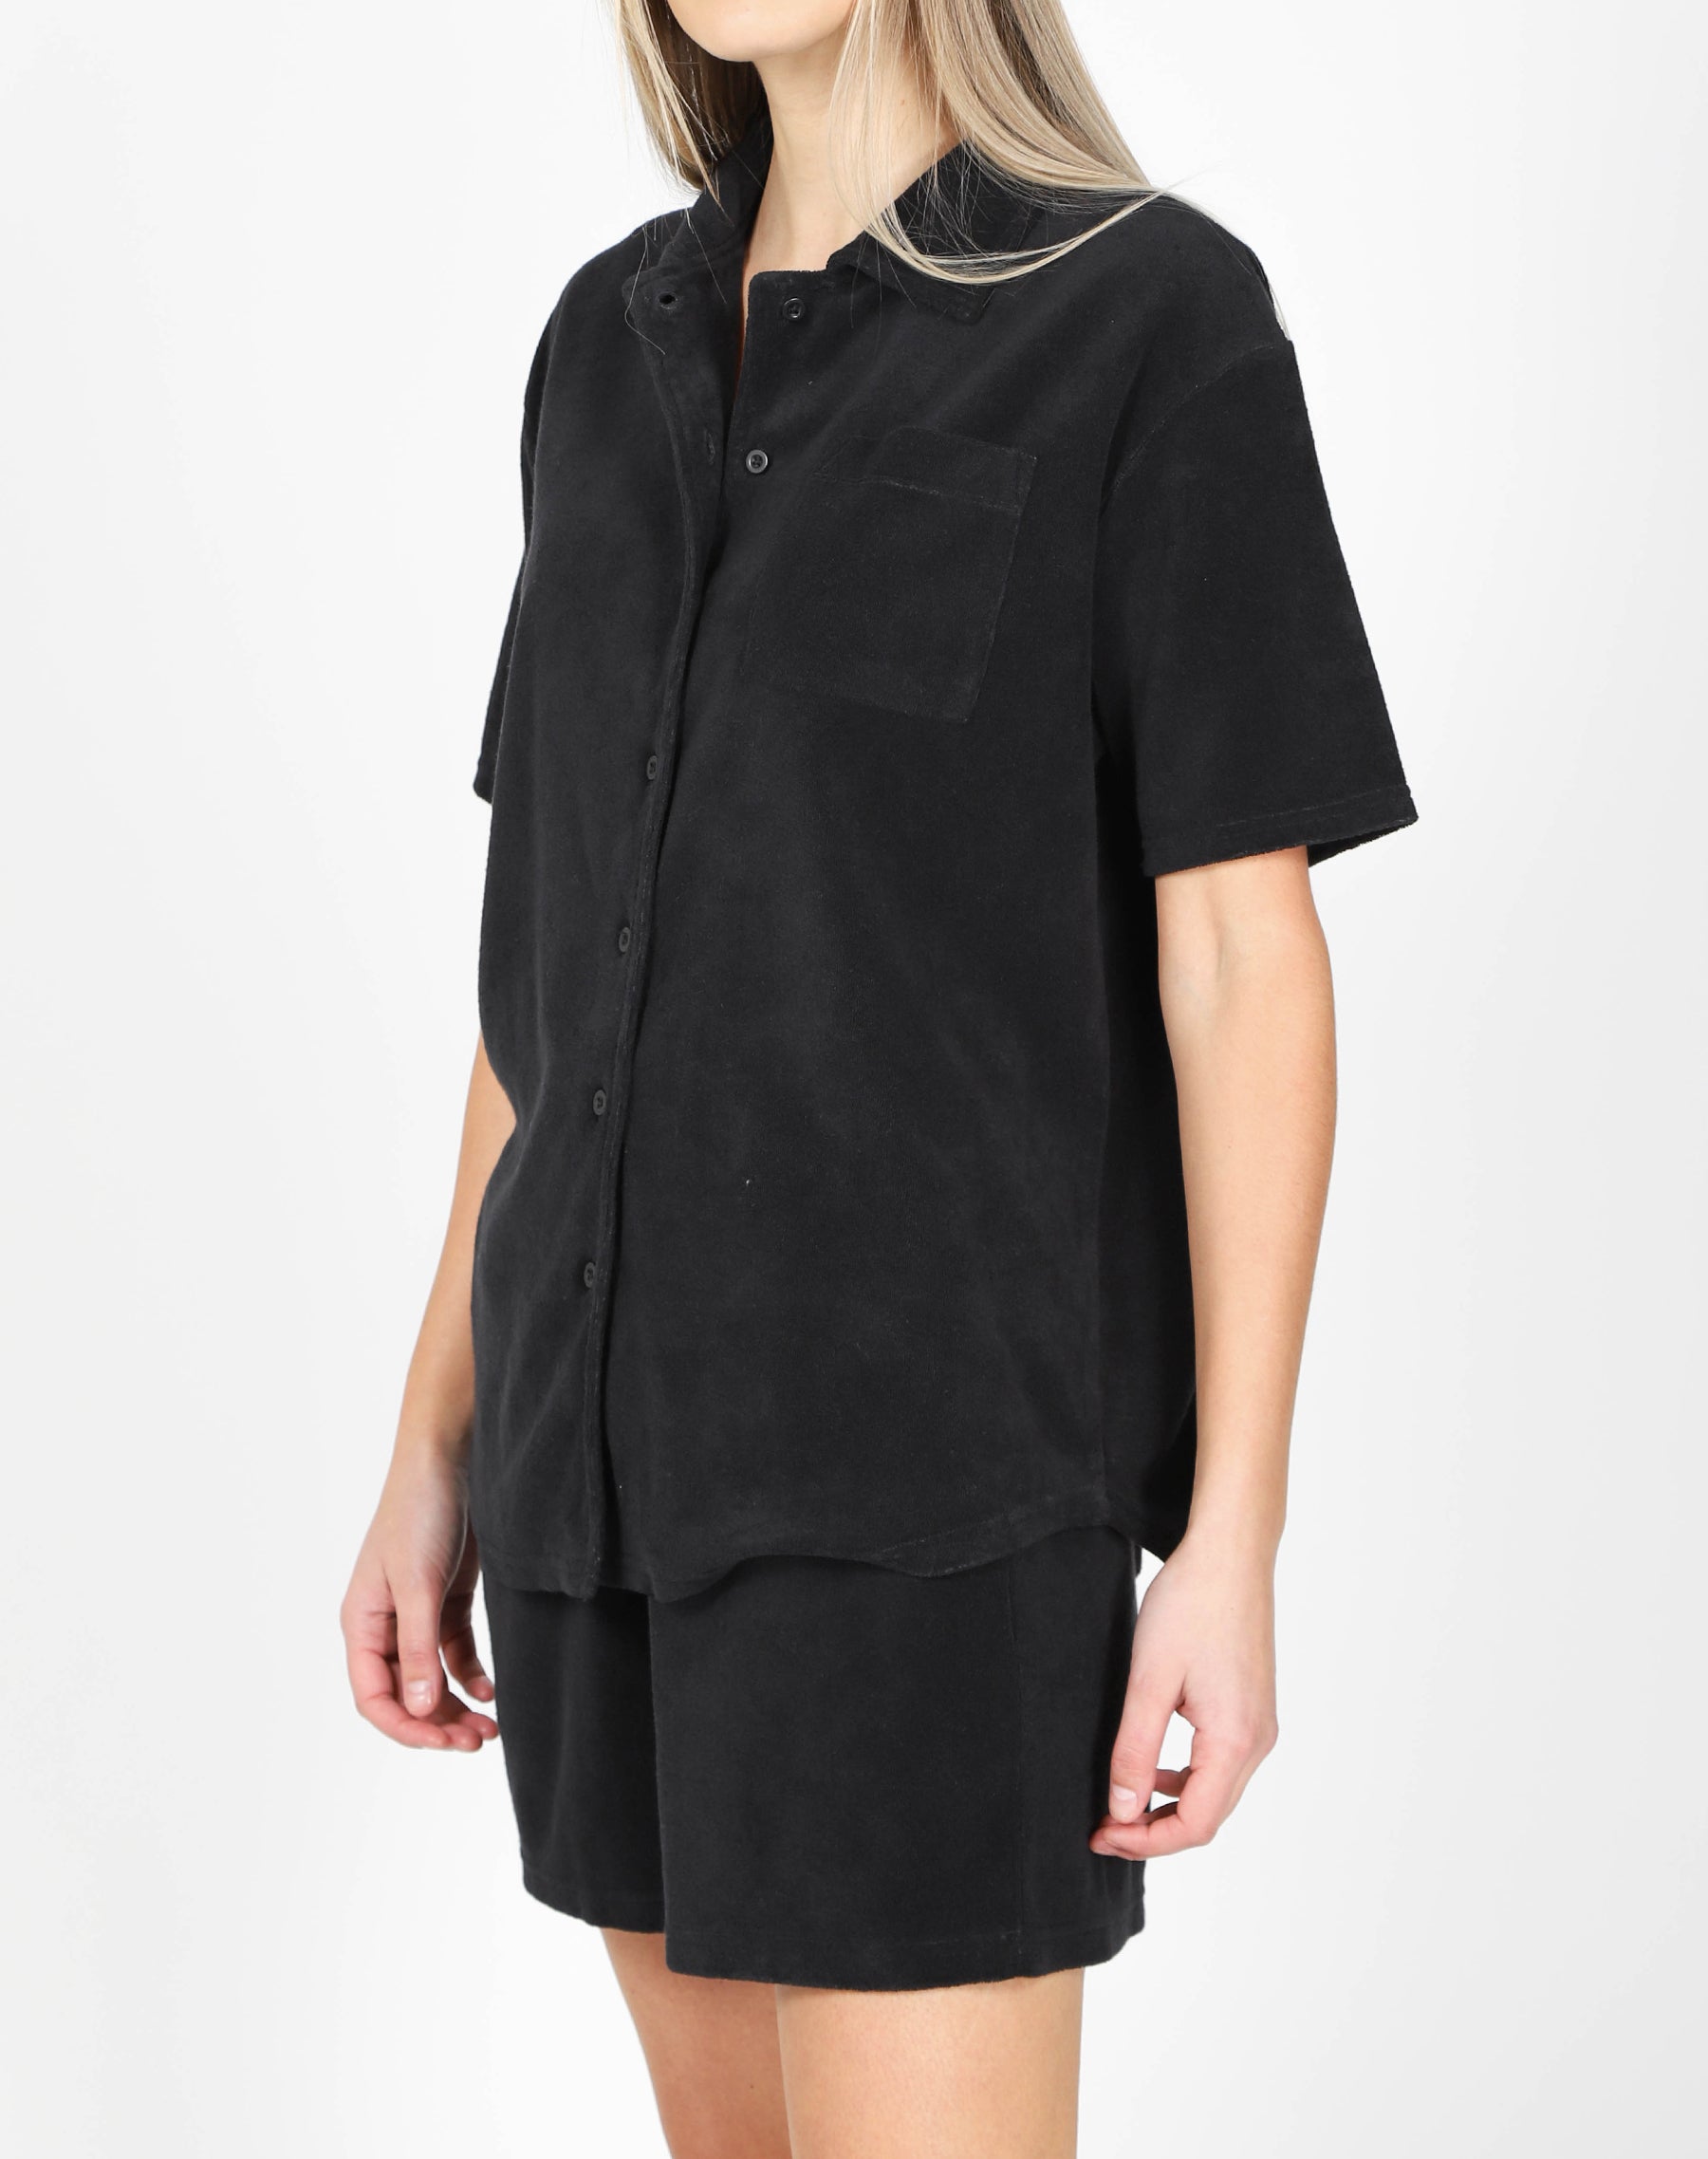 The Terry Cloth Button Up Shirt | Black